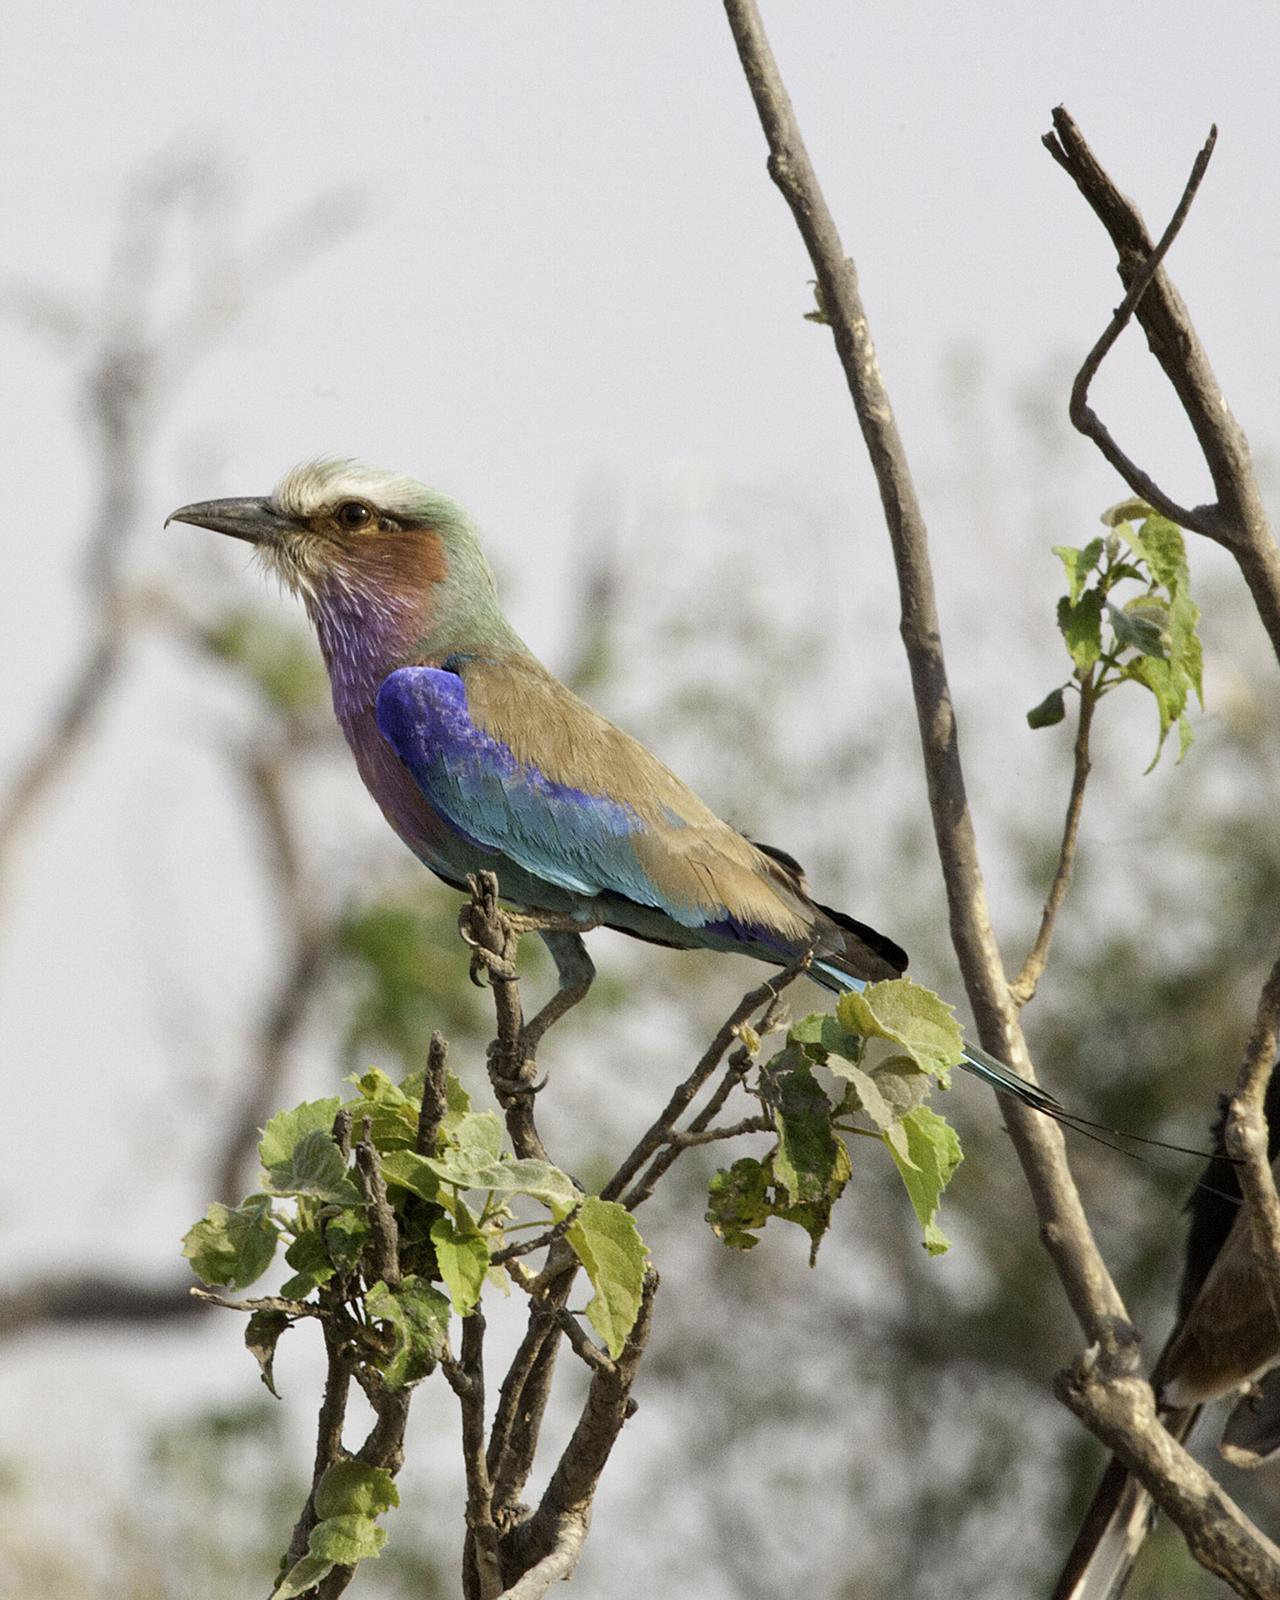 Lilac-breasted Roller Photo by Mary Ann Melton